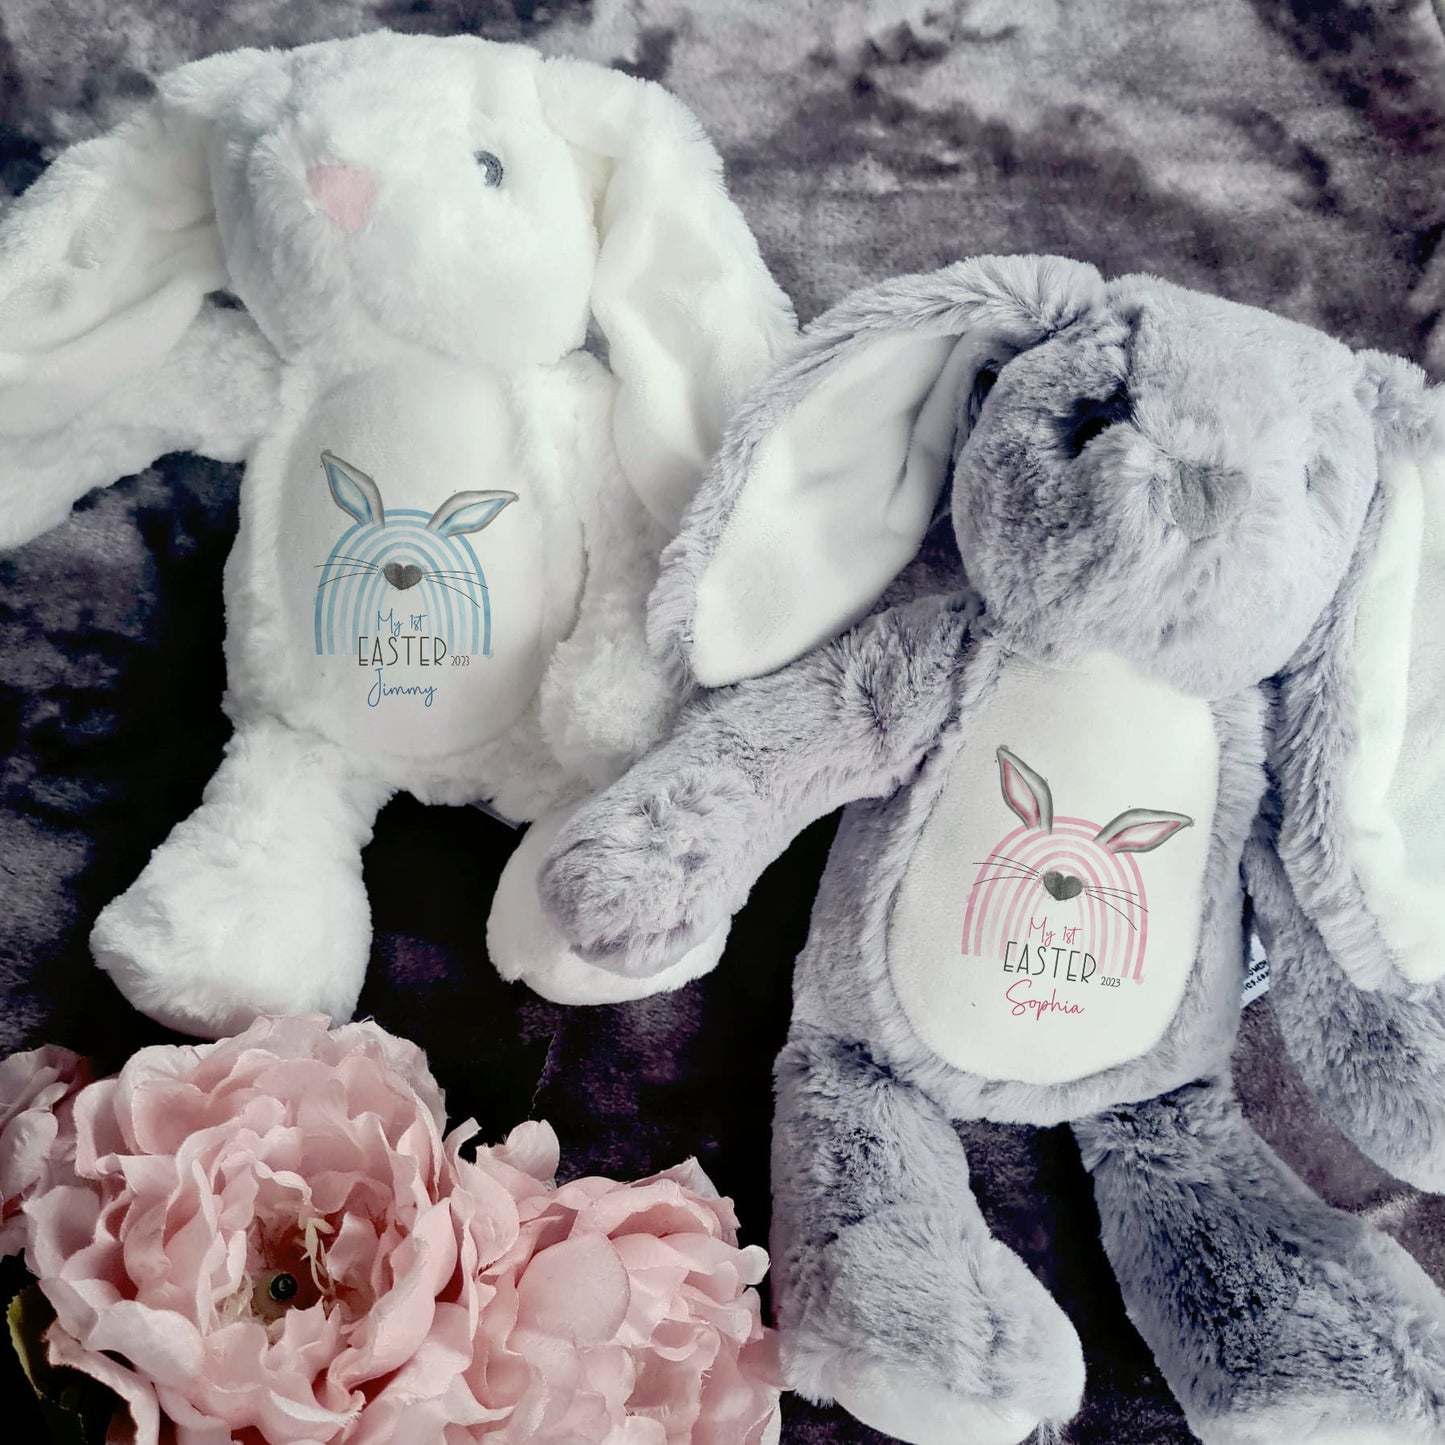 Personalised my 1st Easter bunnybow teddy